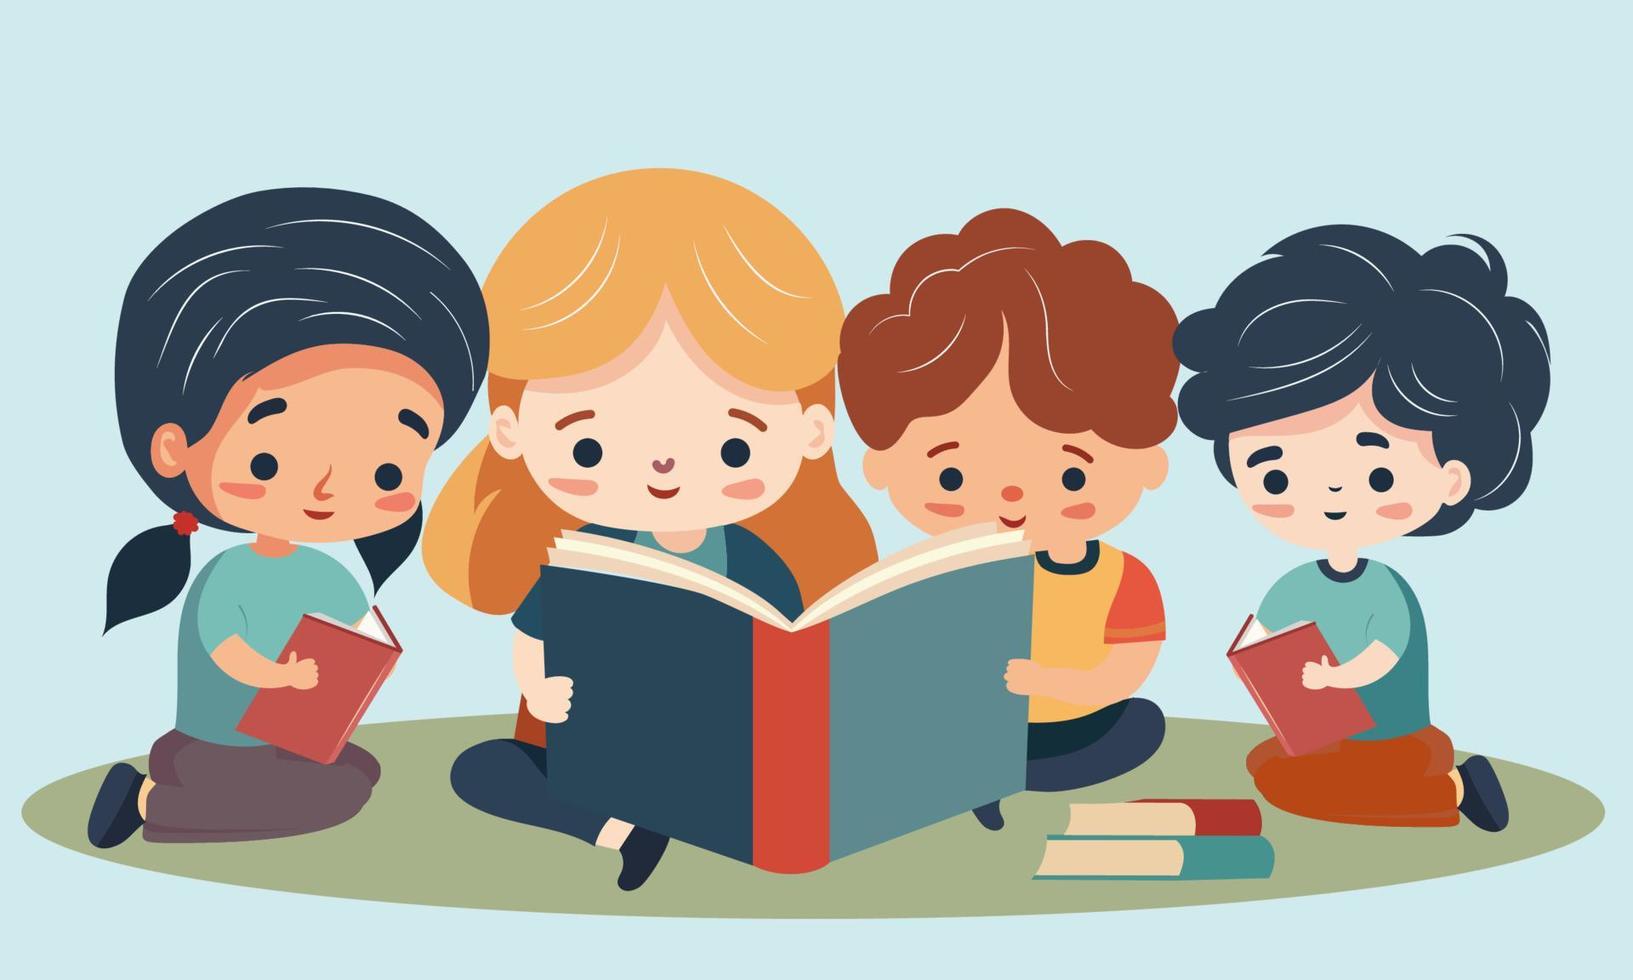 Children Characters  Reading Books Together In Sitting Pose. vector